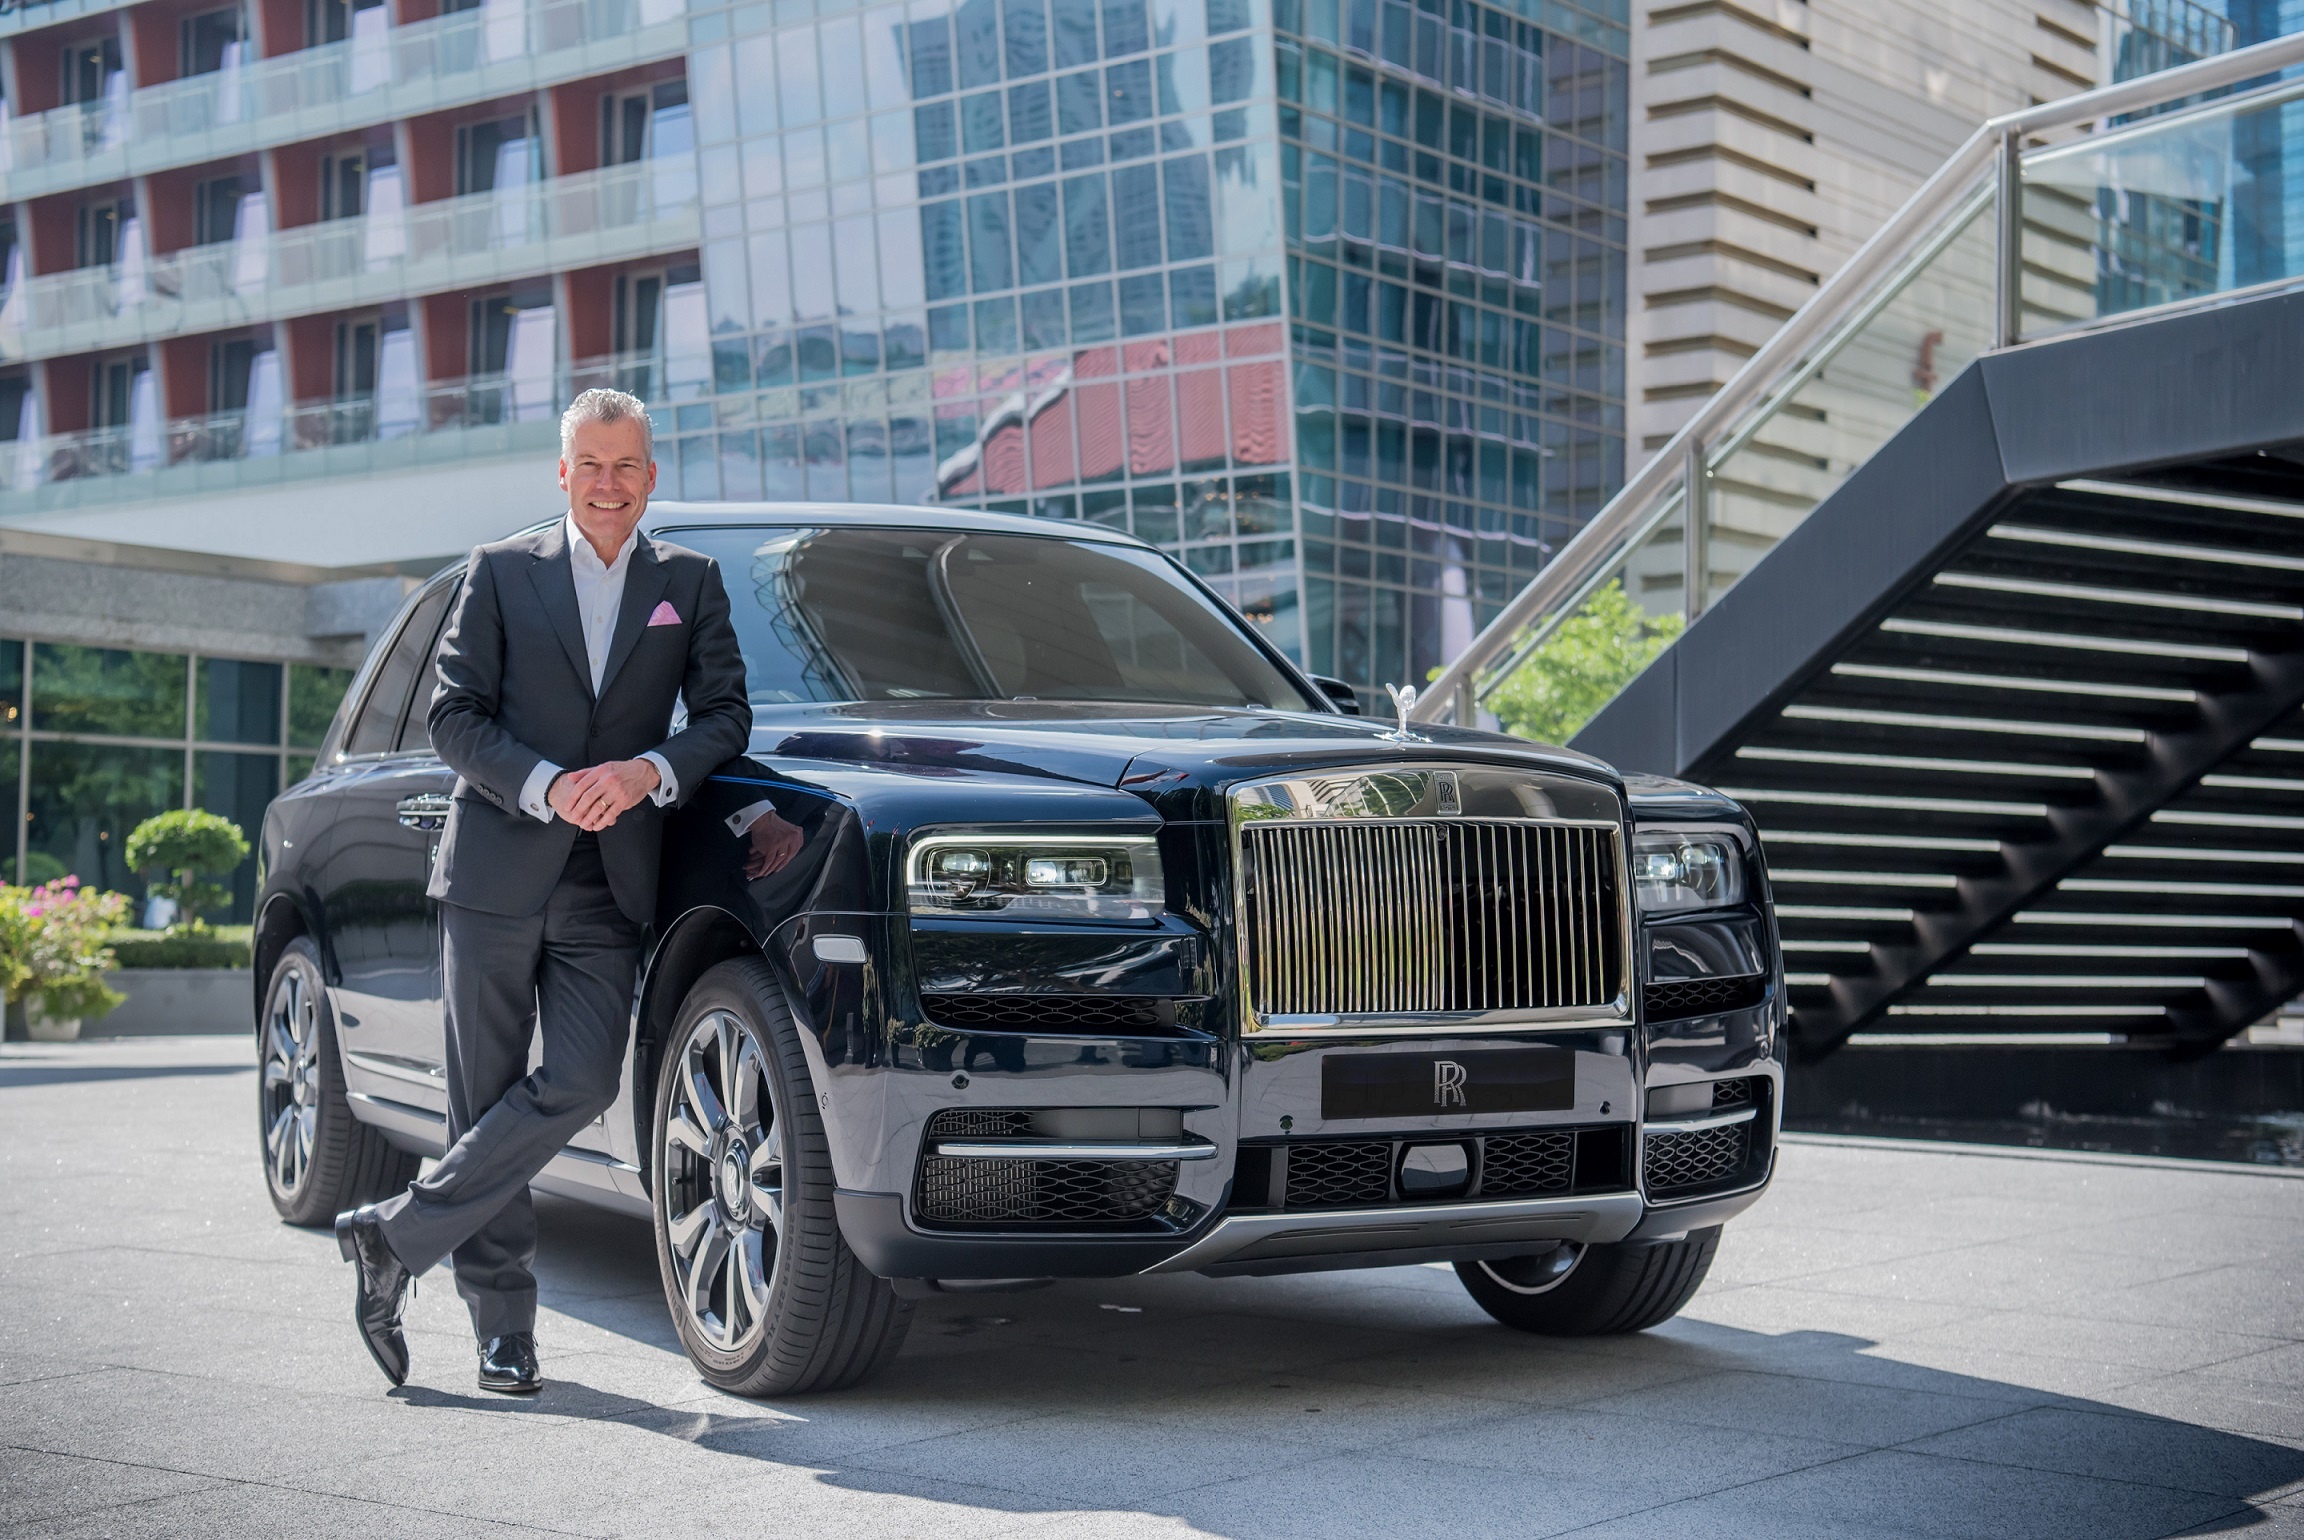 Rolls-Royce Motor Cars Delivers Record Result in 2019